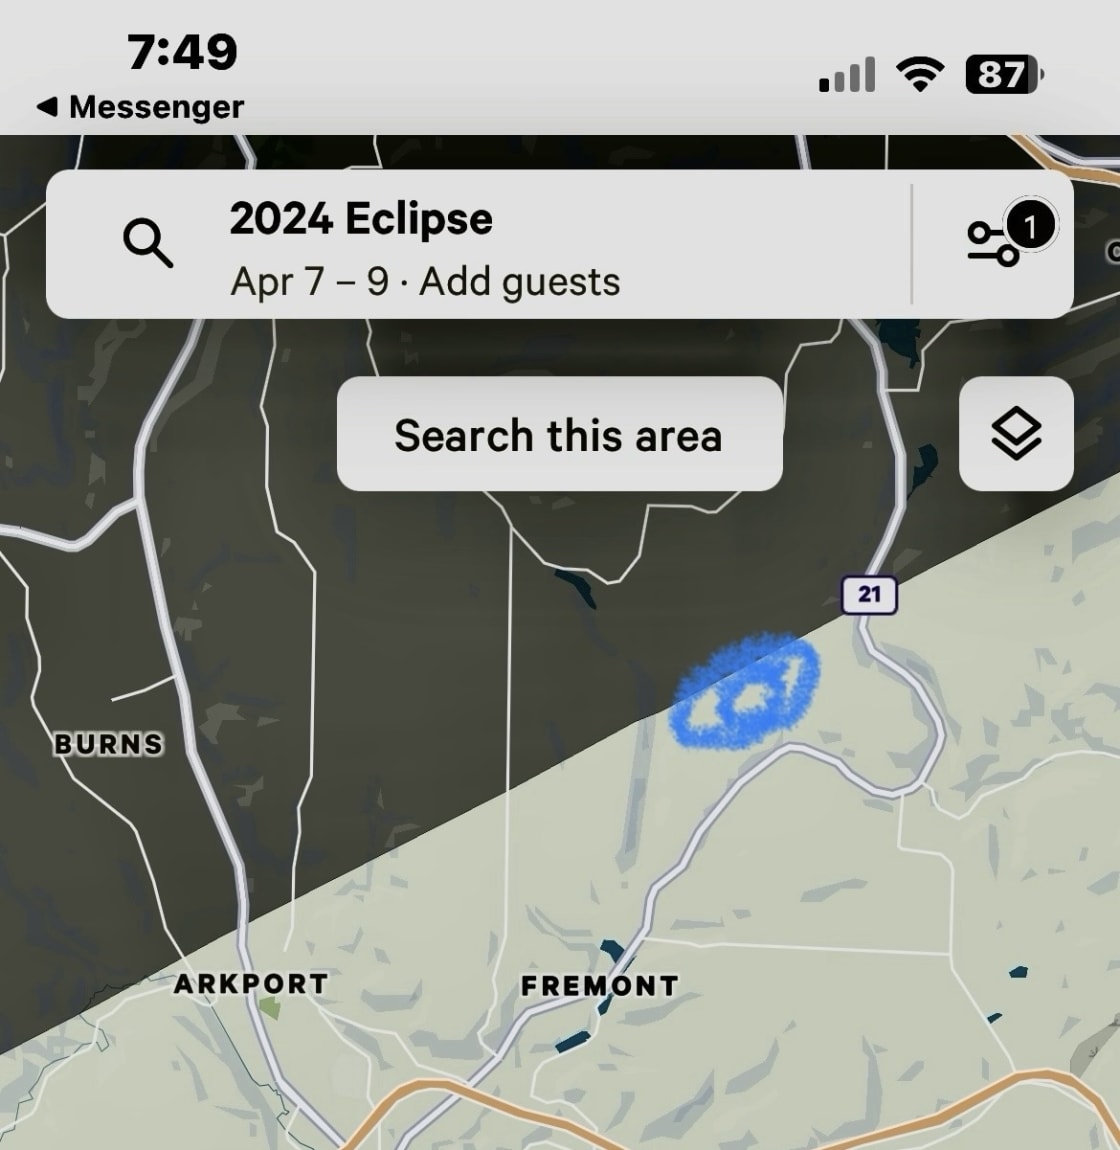 We are right on the edge of prime viewing area for the 4/8/24 eclipse and minutes from multiple great viewing location 